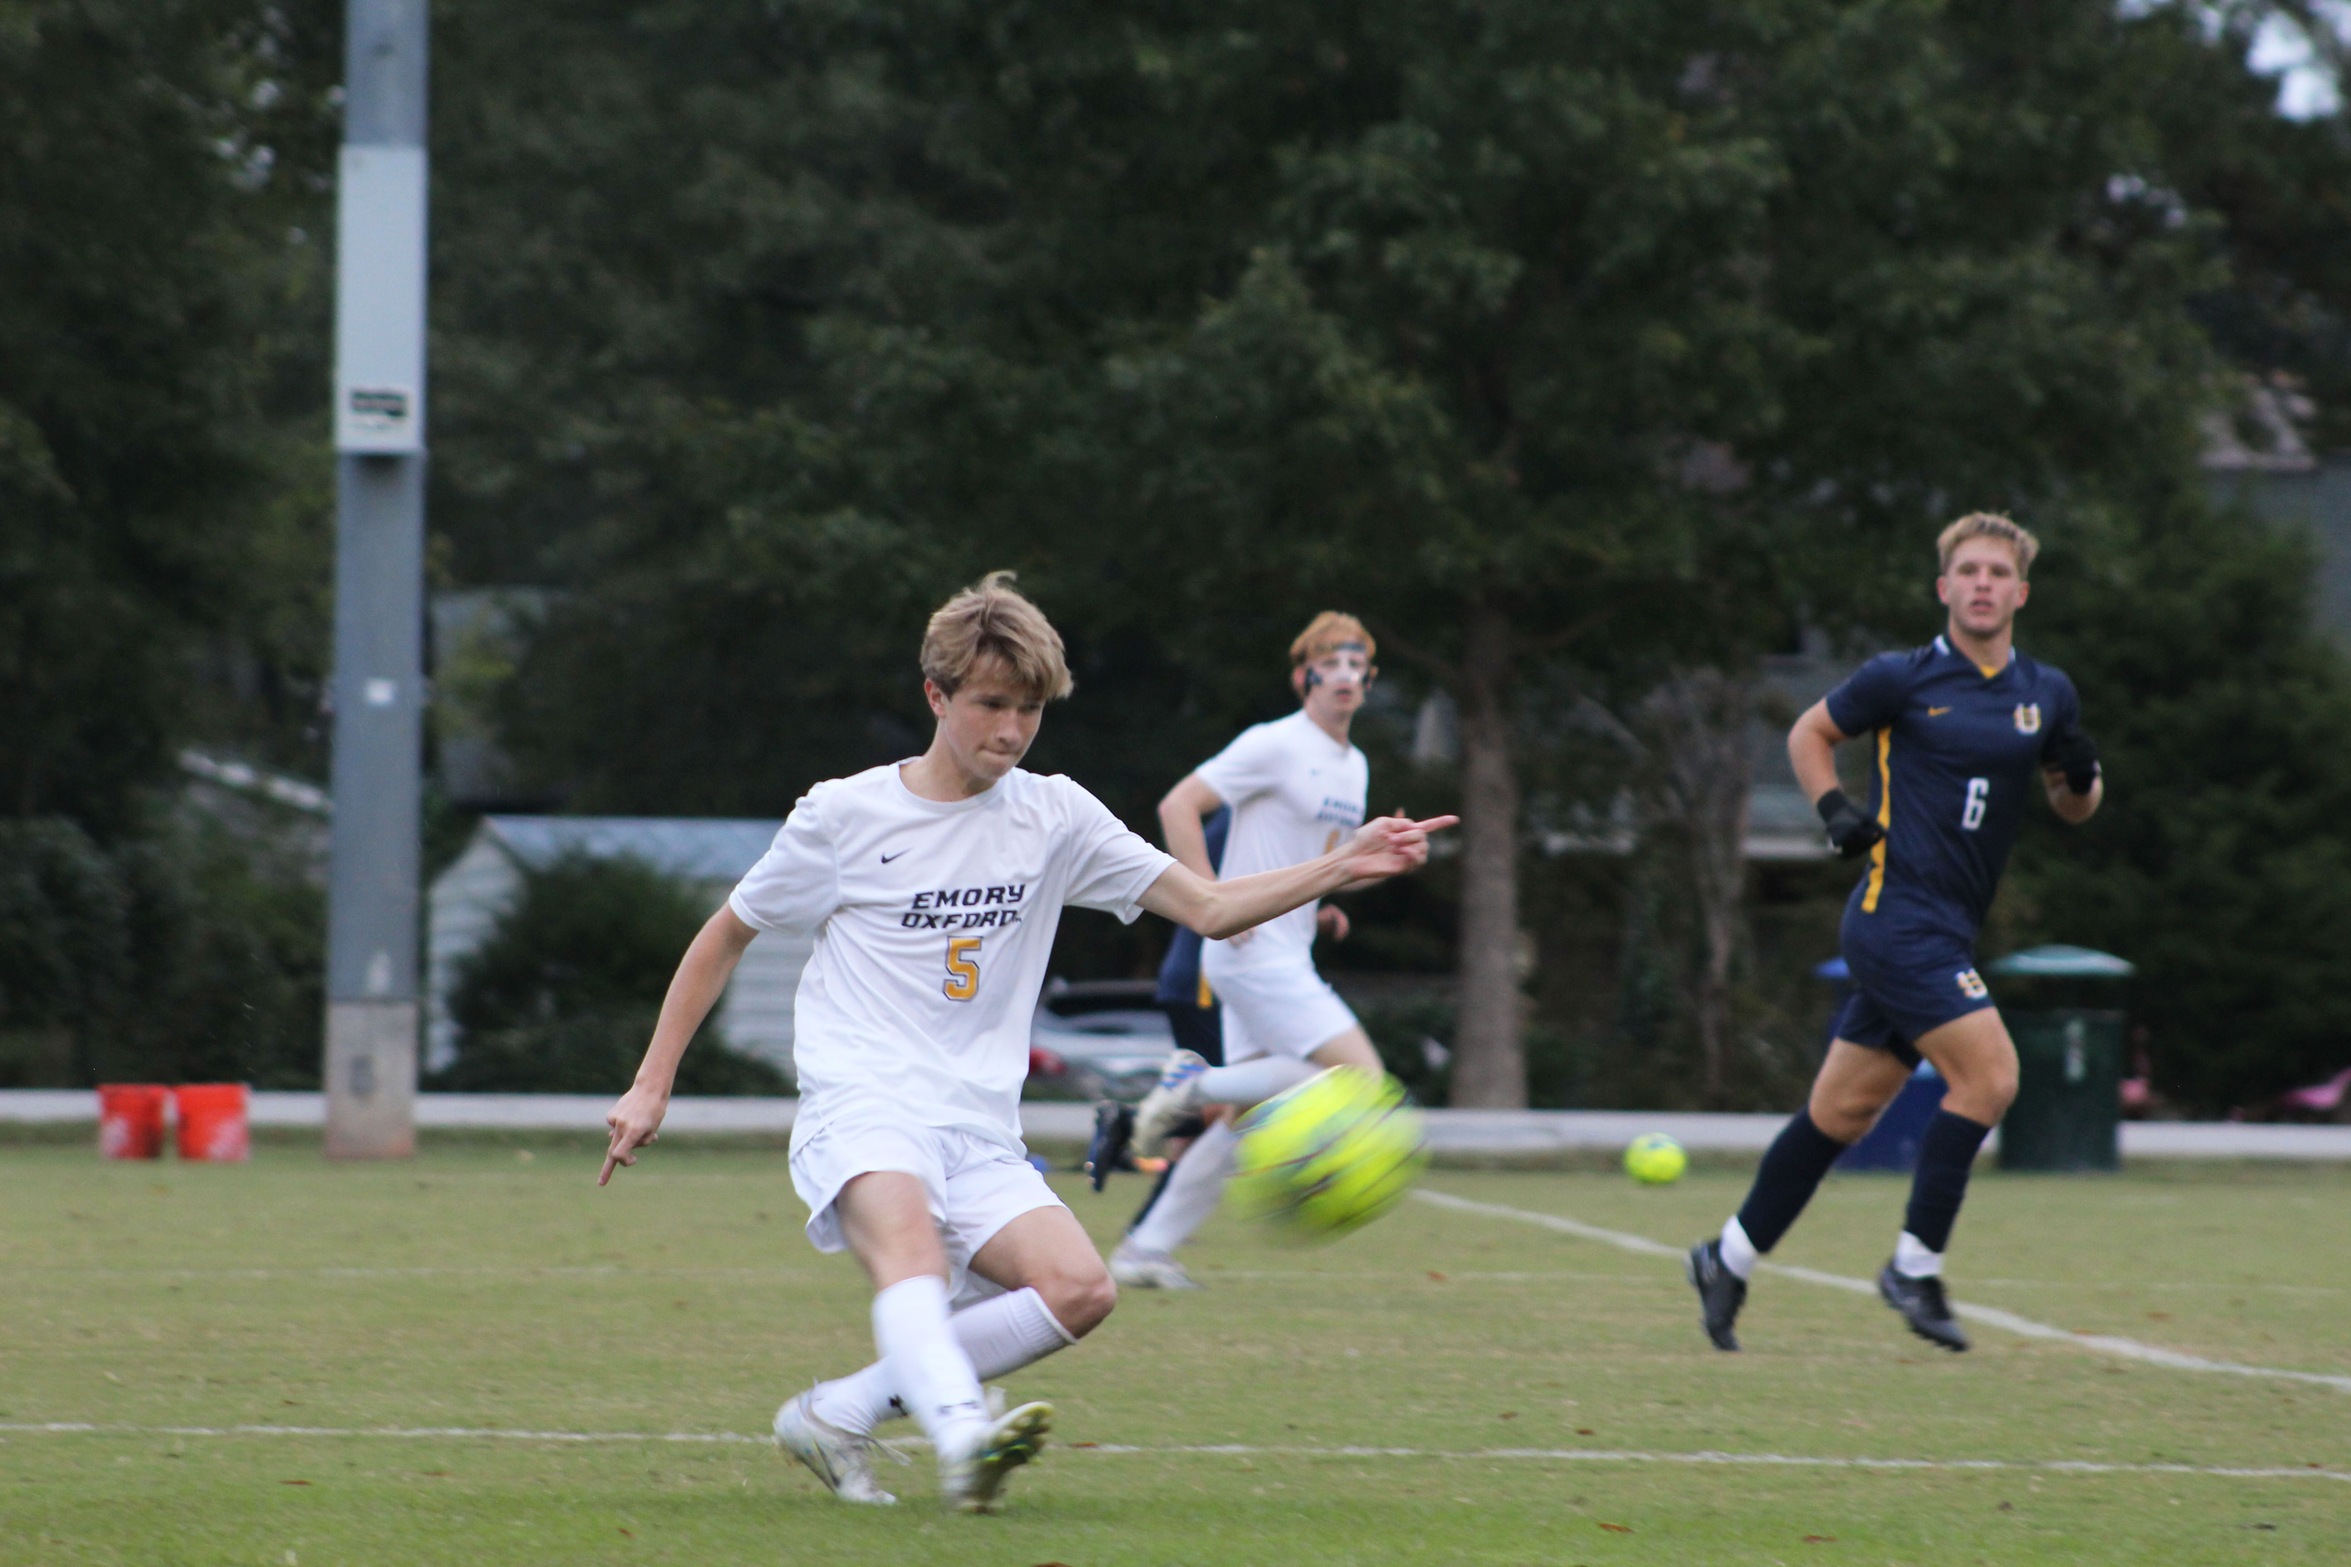 Men's soccer drops game 4-1 to Southern Union State